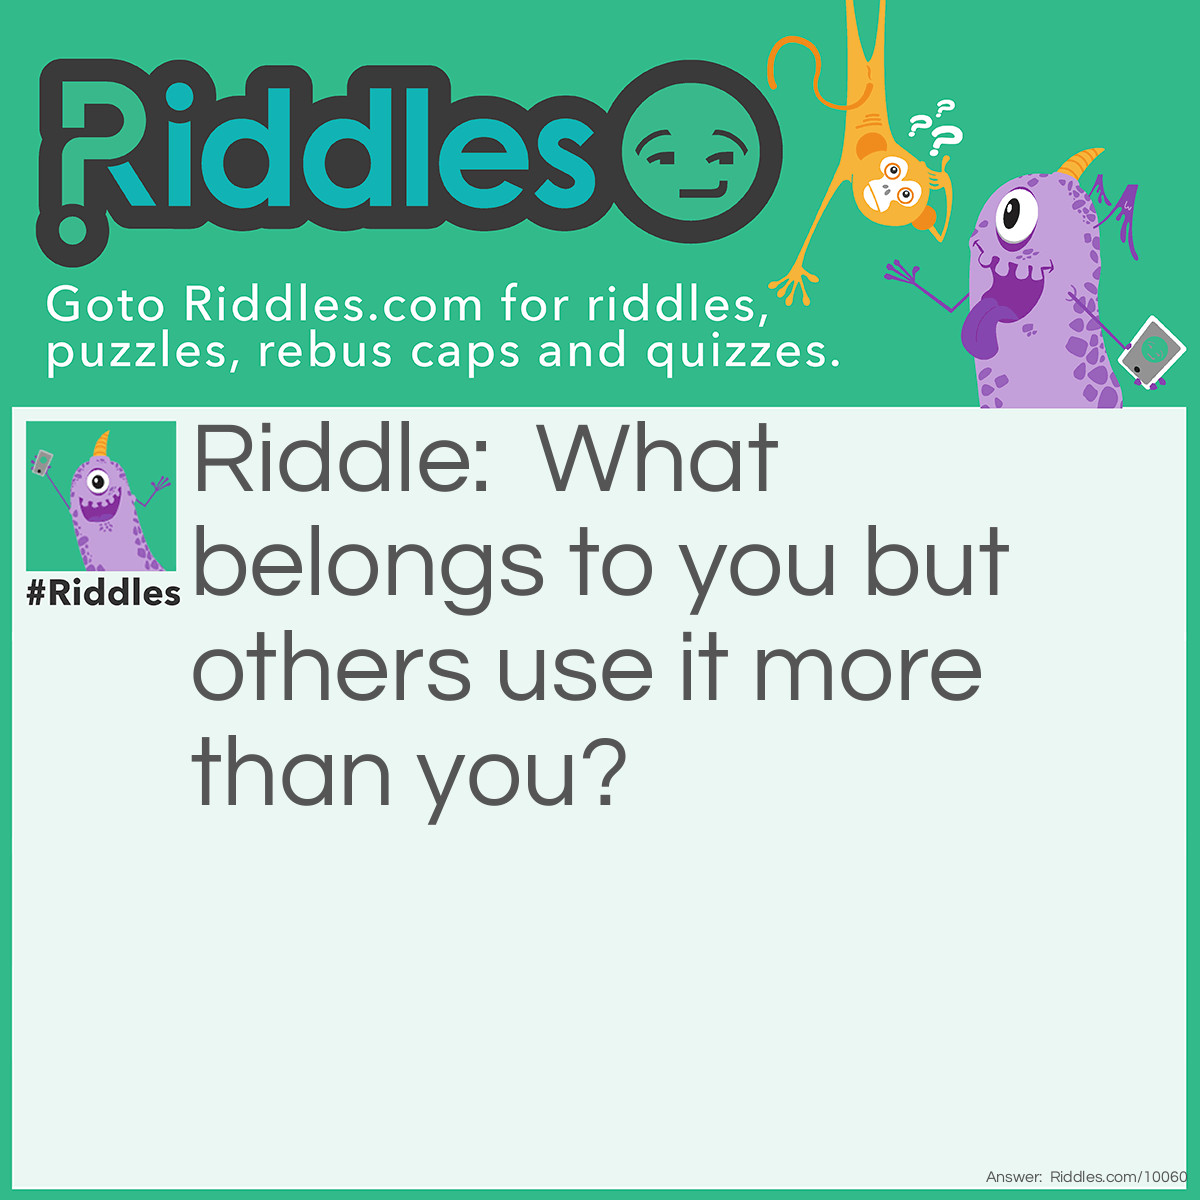 Riddle: What belongs to you but others use it more than you? Answer: Your name